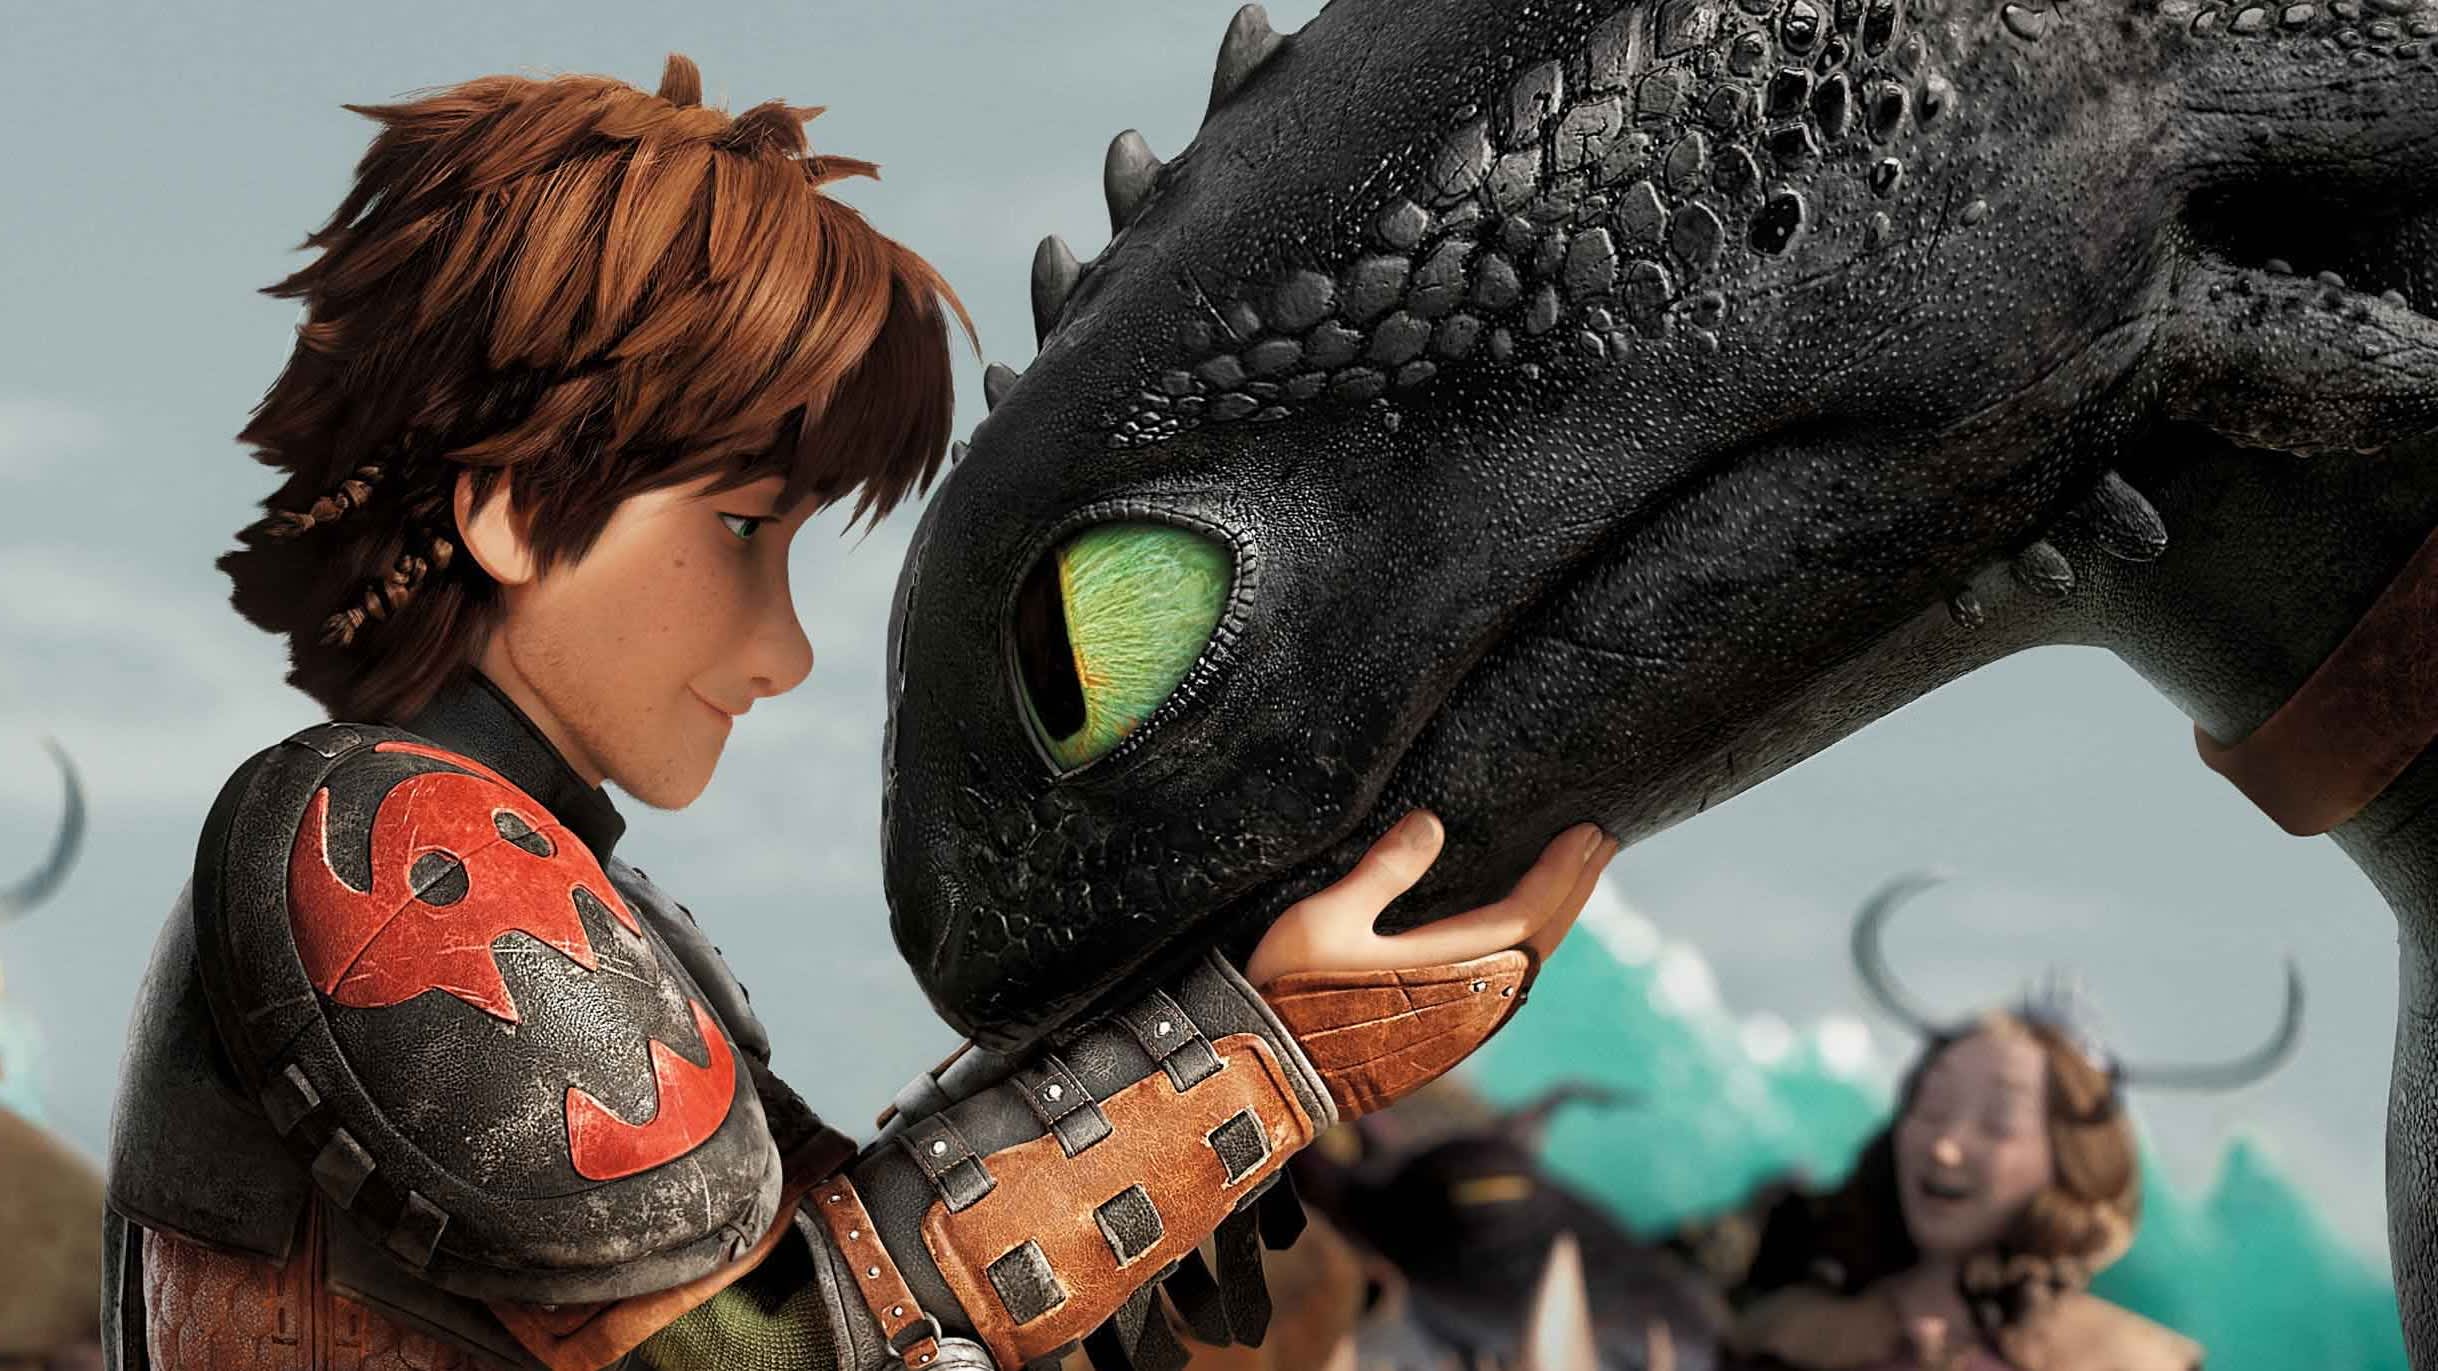 Why is Universal making live action How to Train Your Dragon?